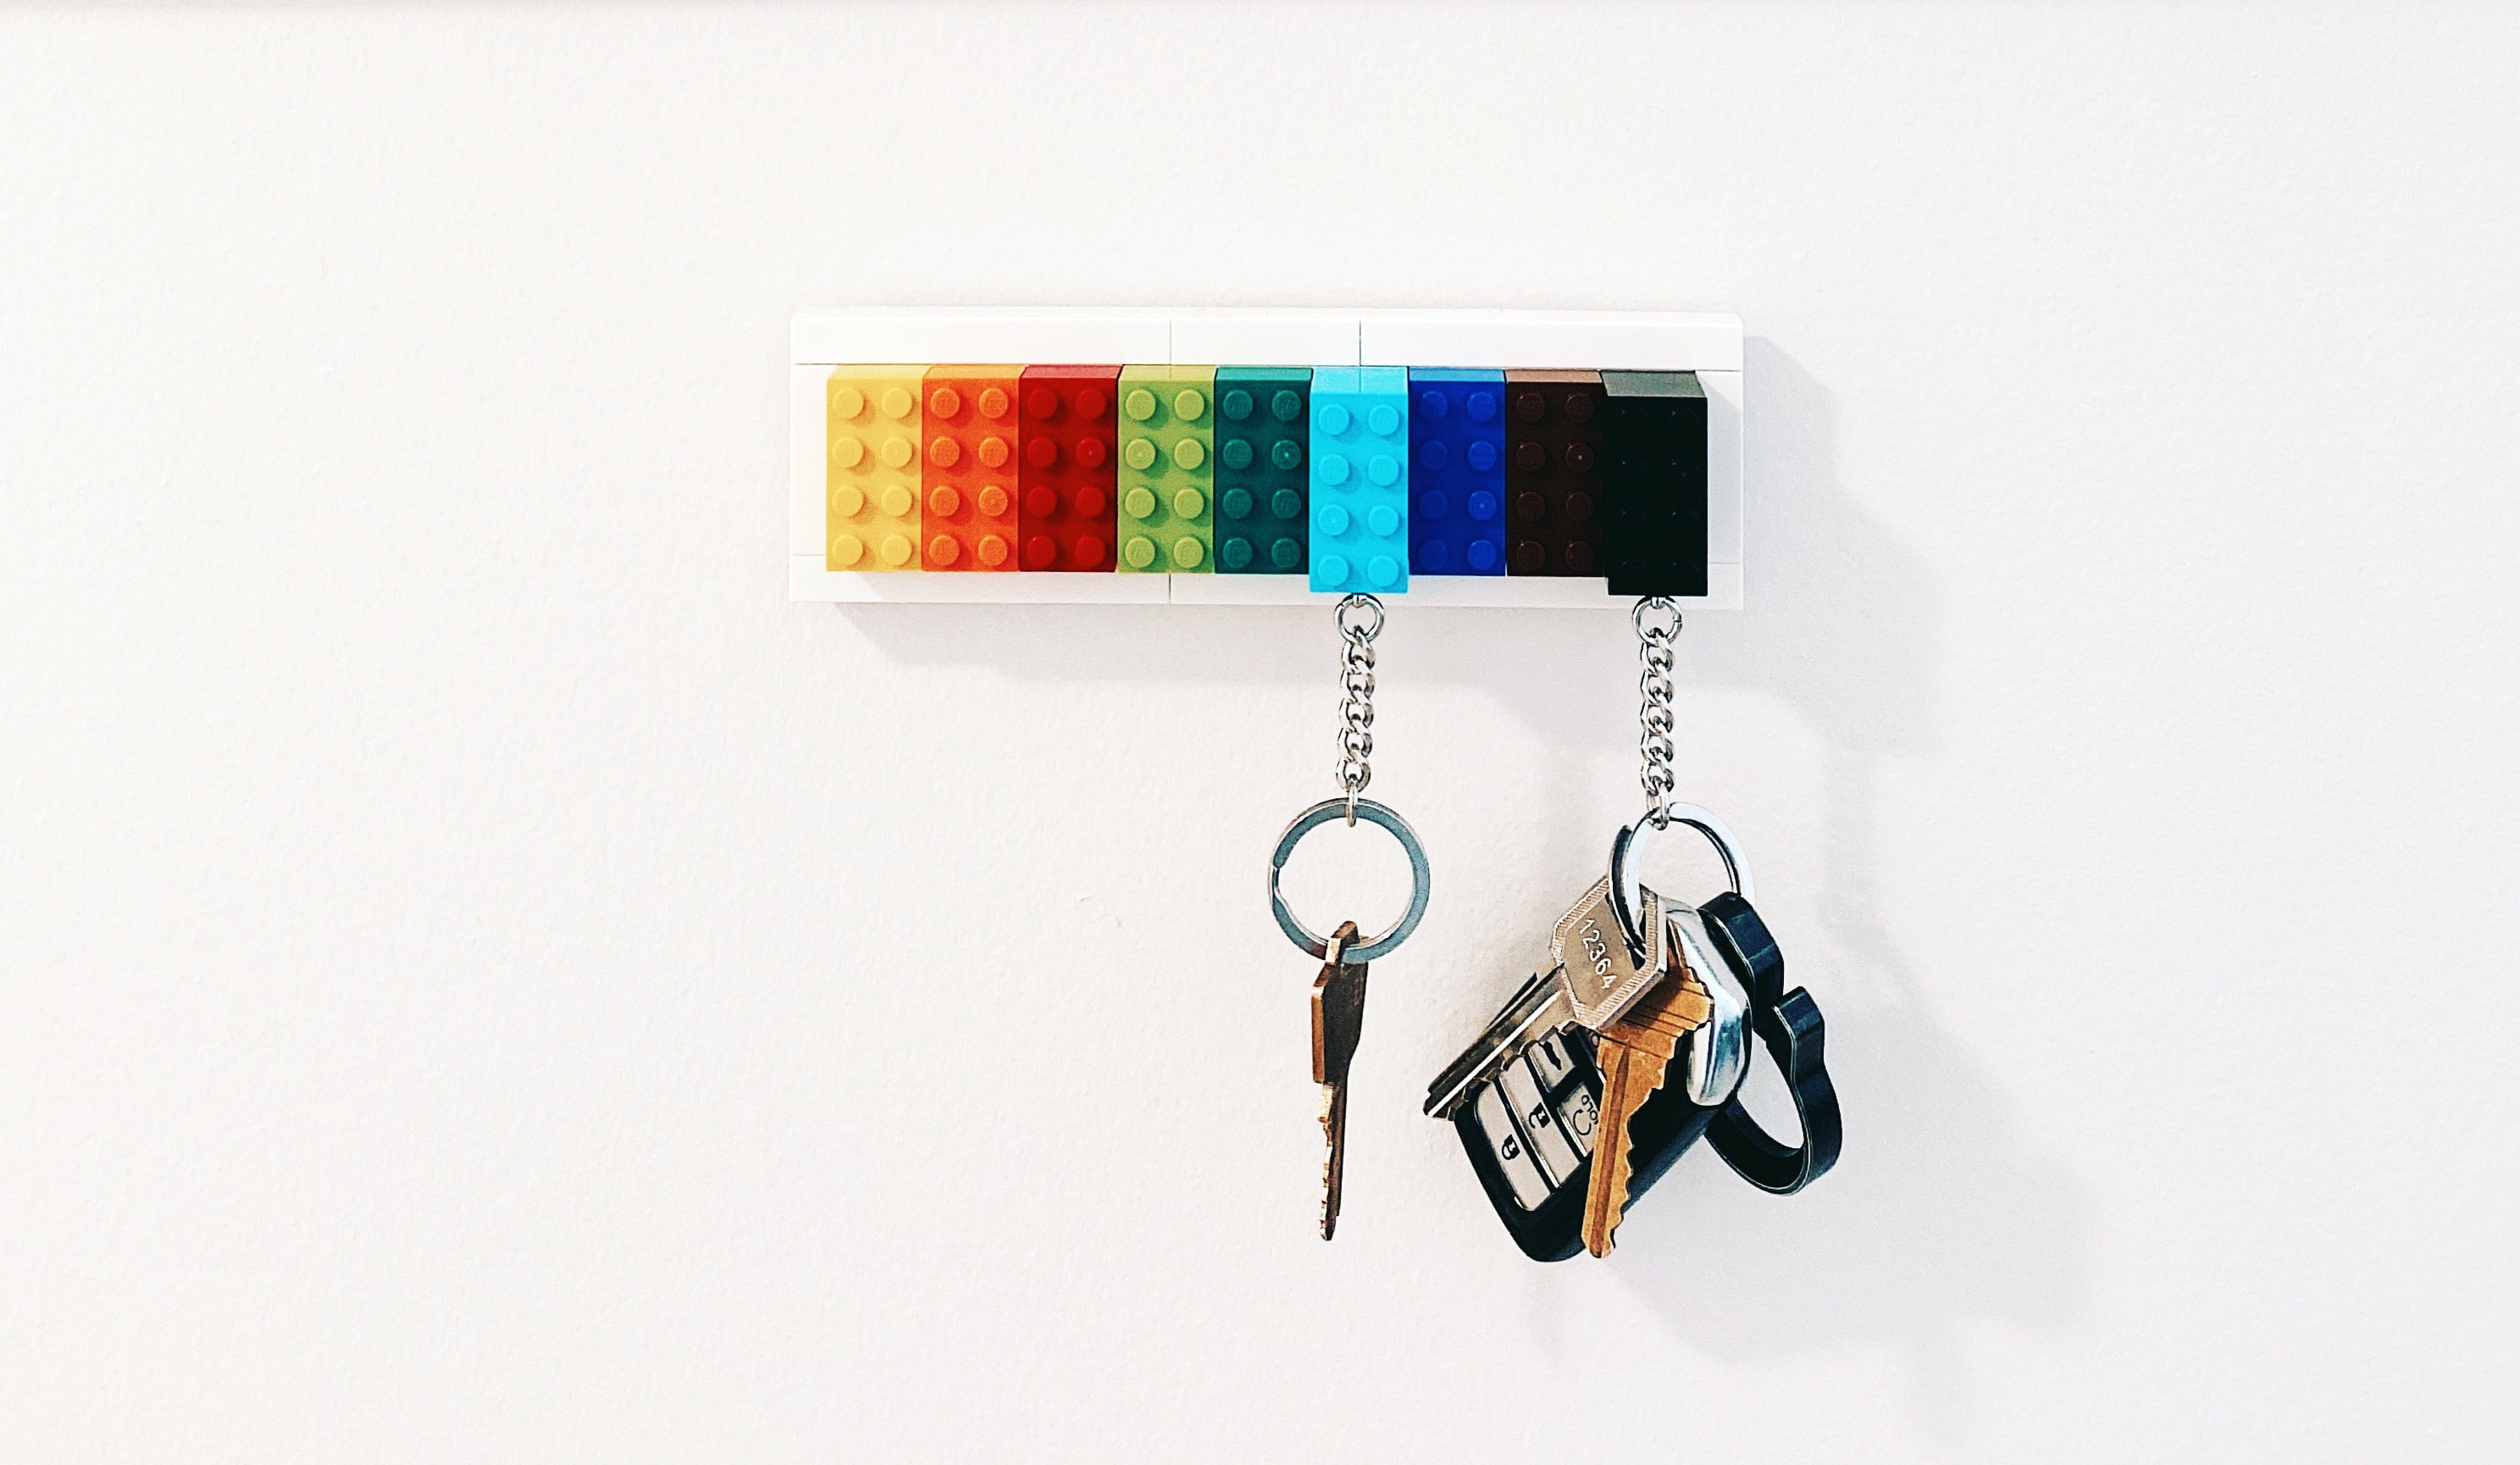 Keys hanging from a lego brick used as a keychain attached to some lego bricks on the wall